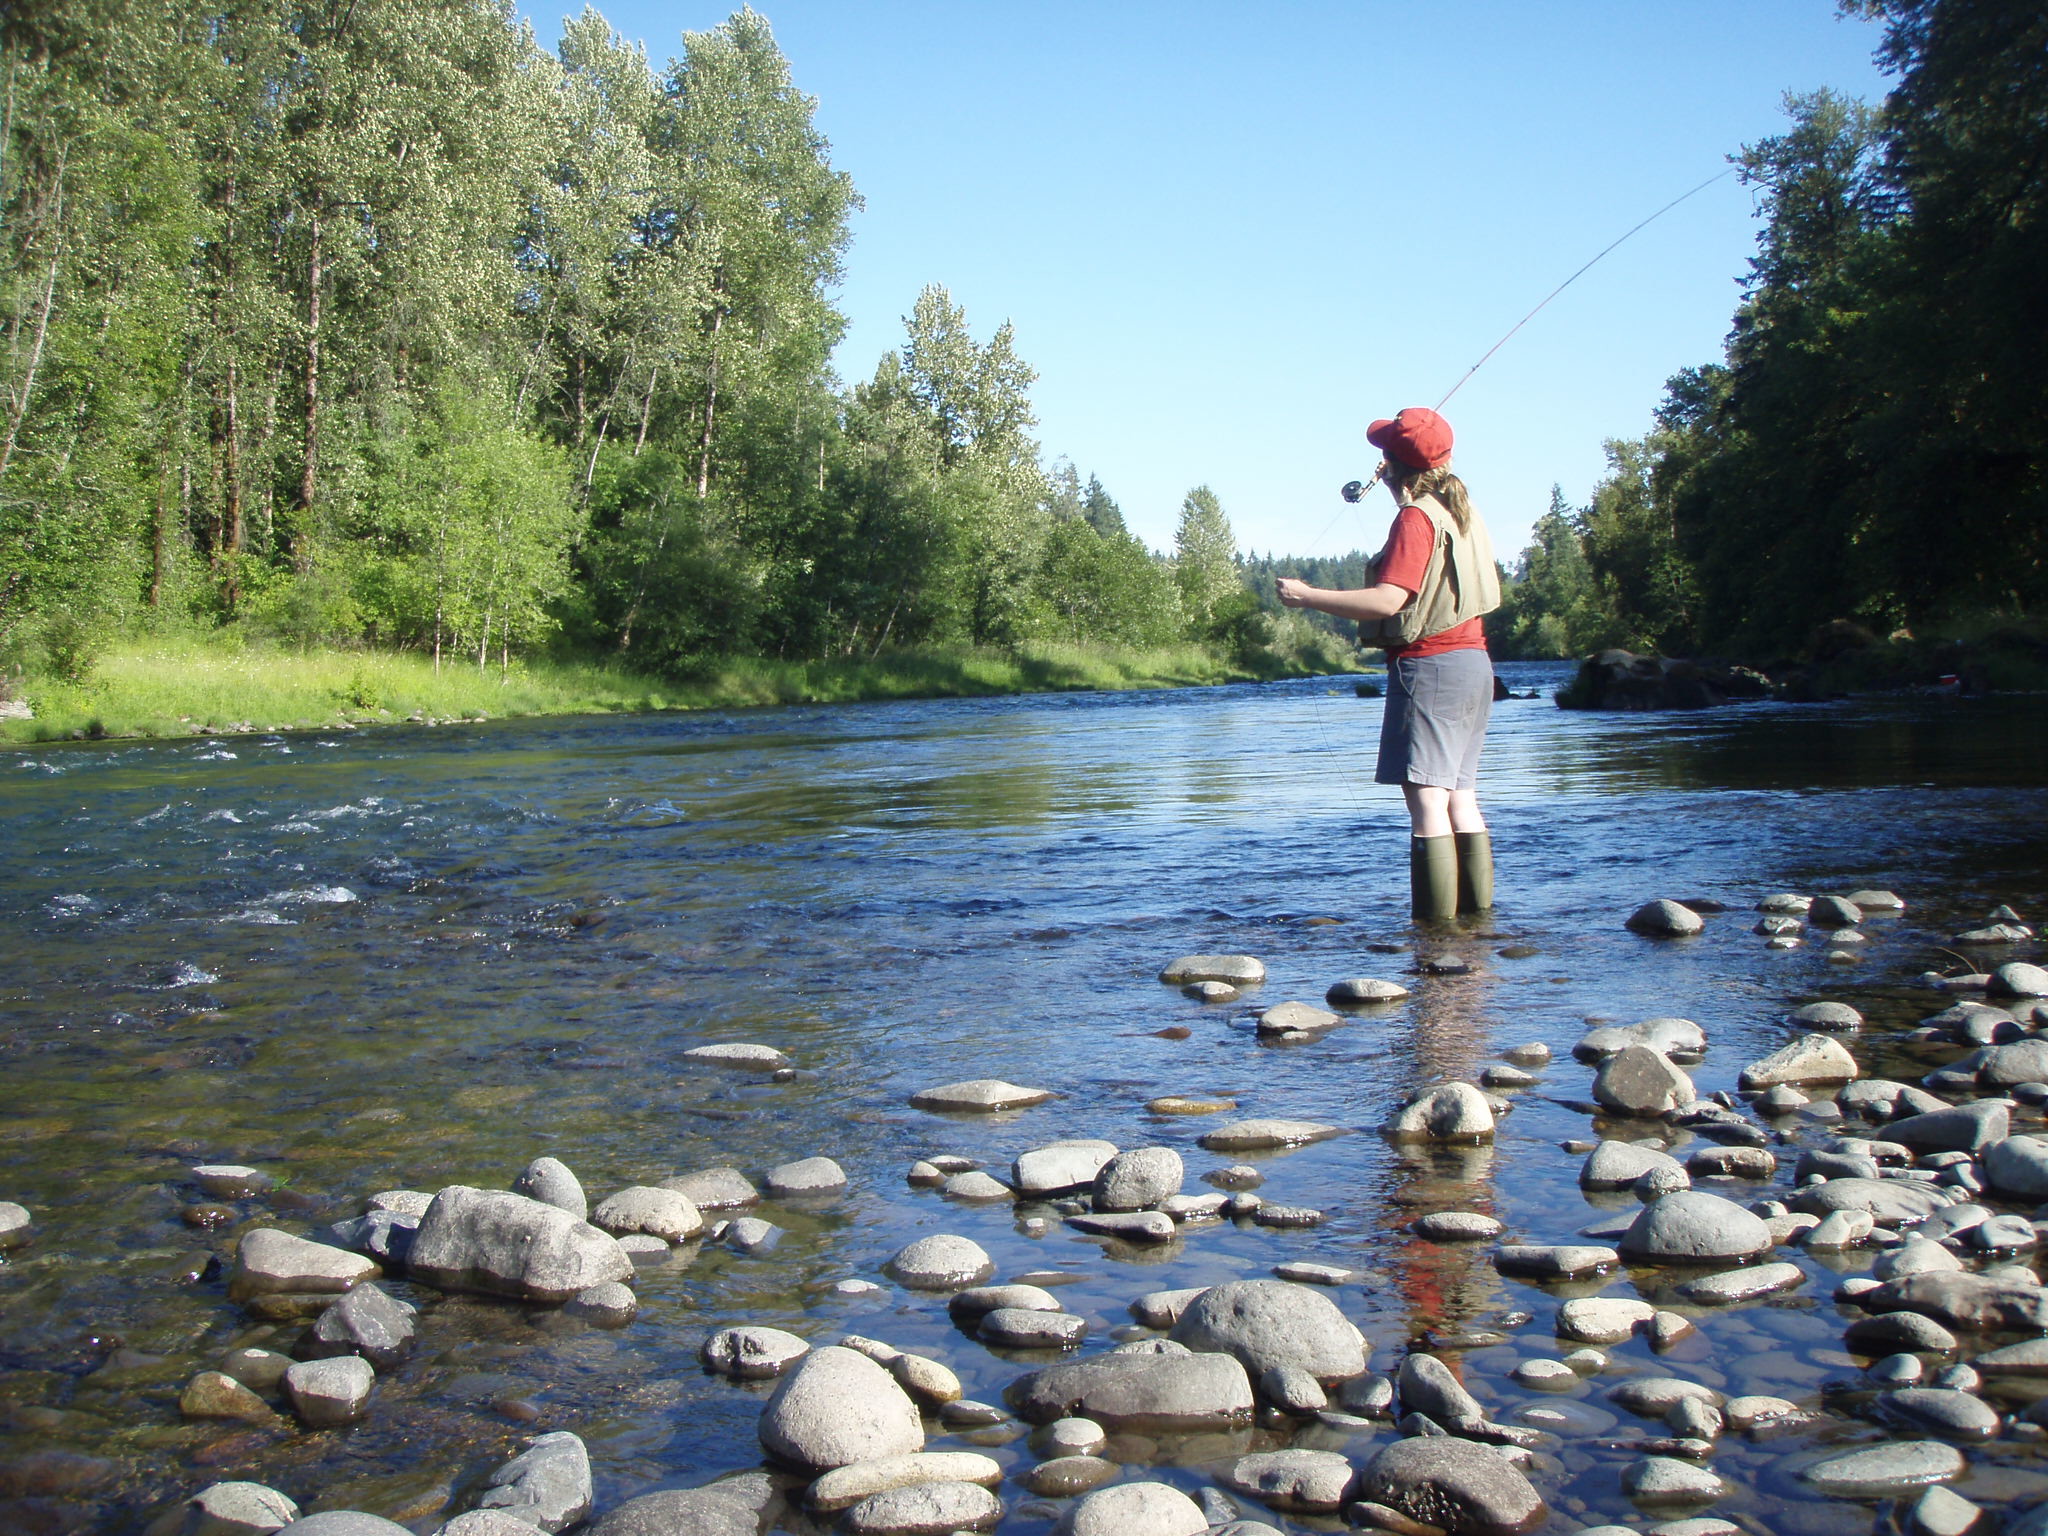 2048x1536 File:Fly fishing on the South Santiam.jpg